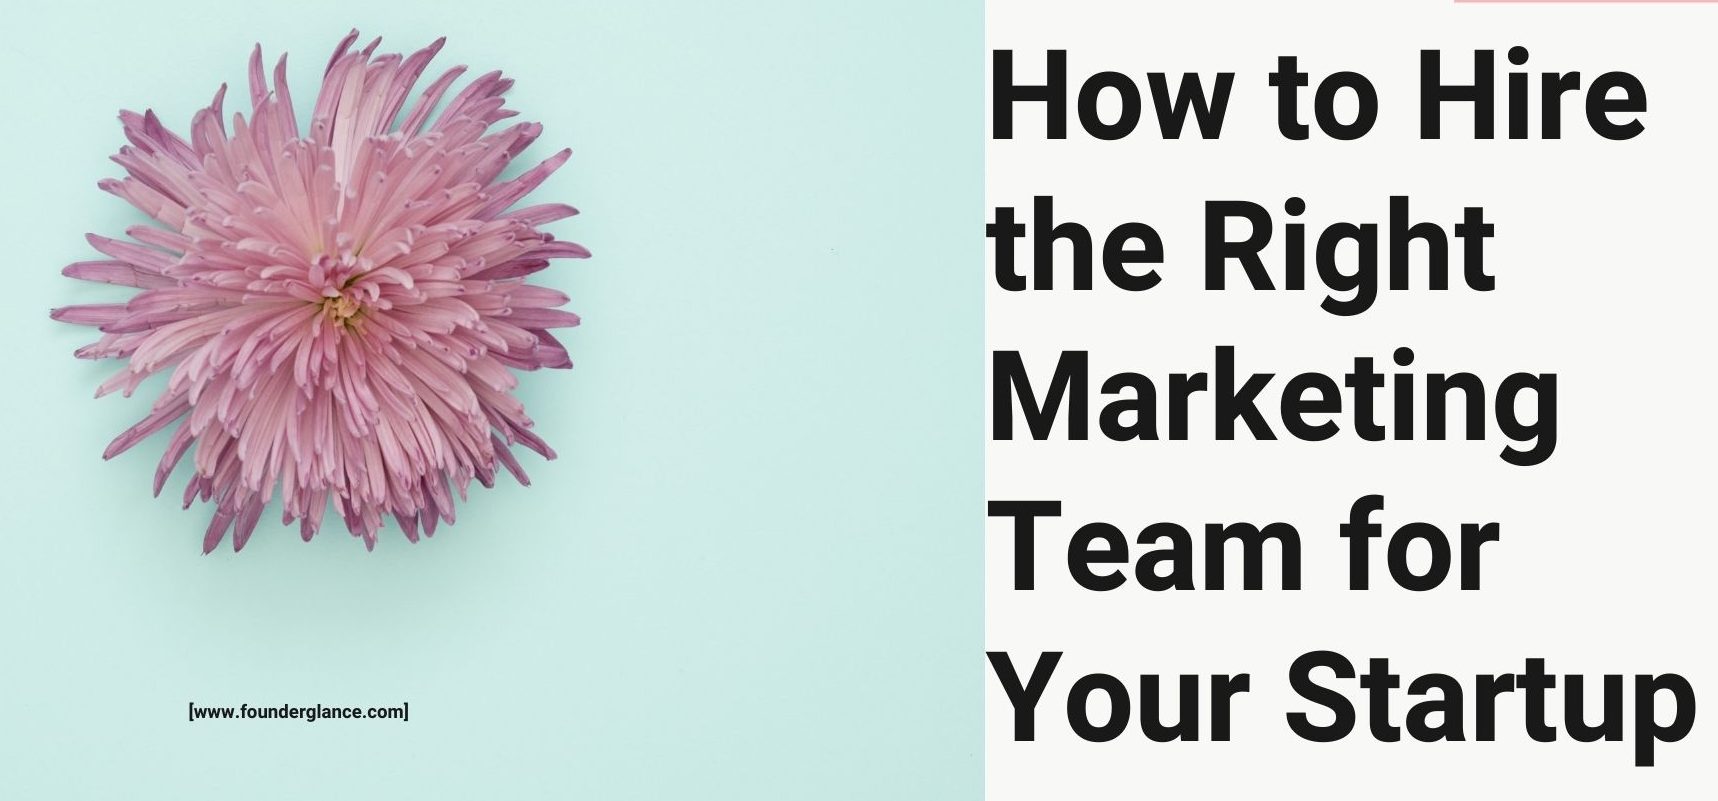 How to Hire the Right Marketing Team for Your Startup